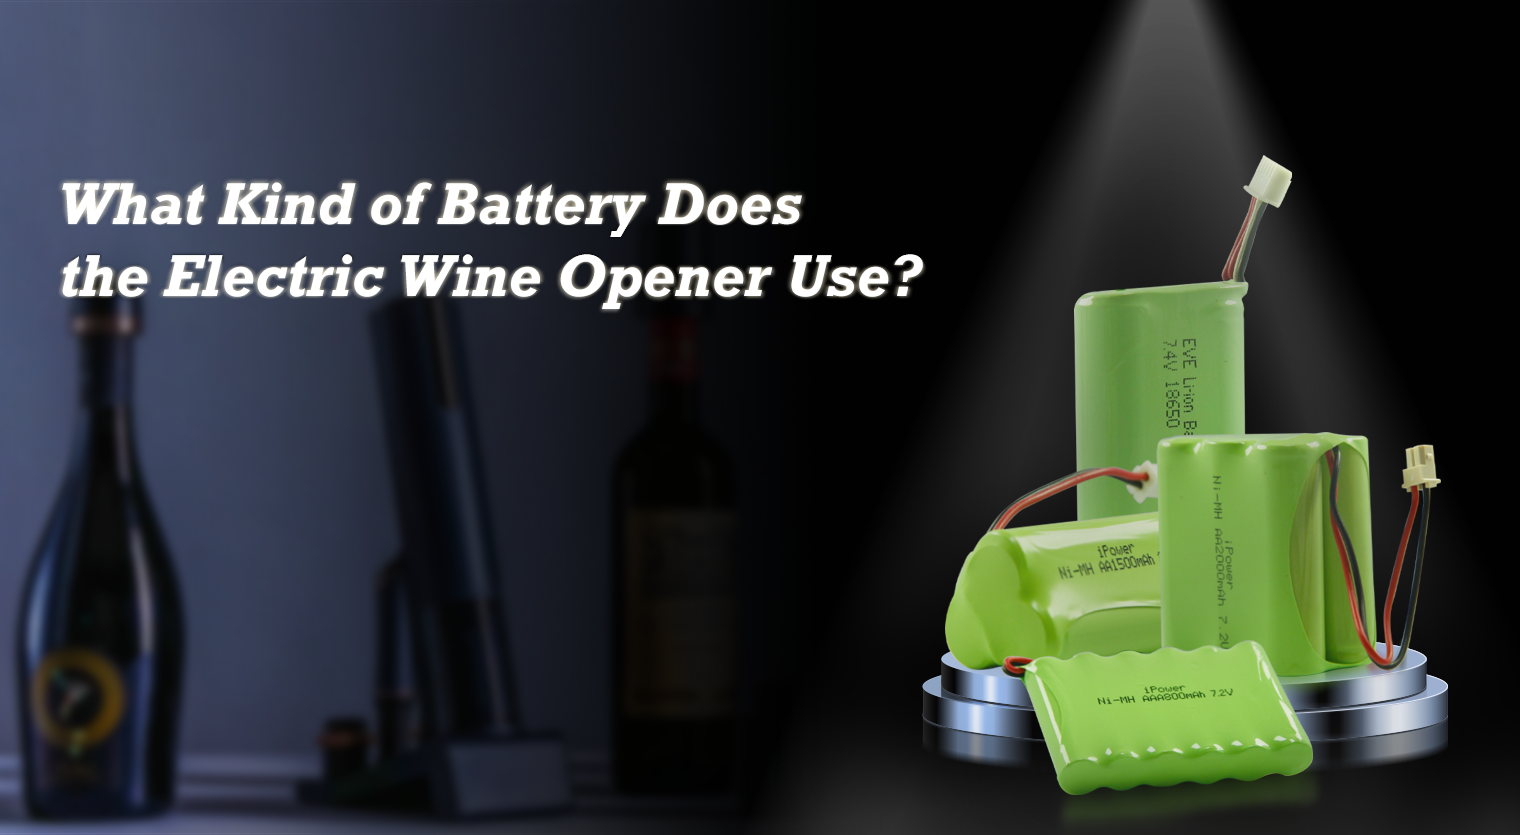 What Kind of Battery Does the Electric Wine Opener Use